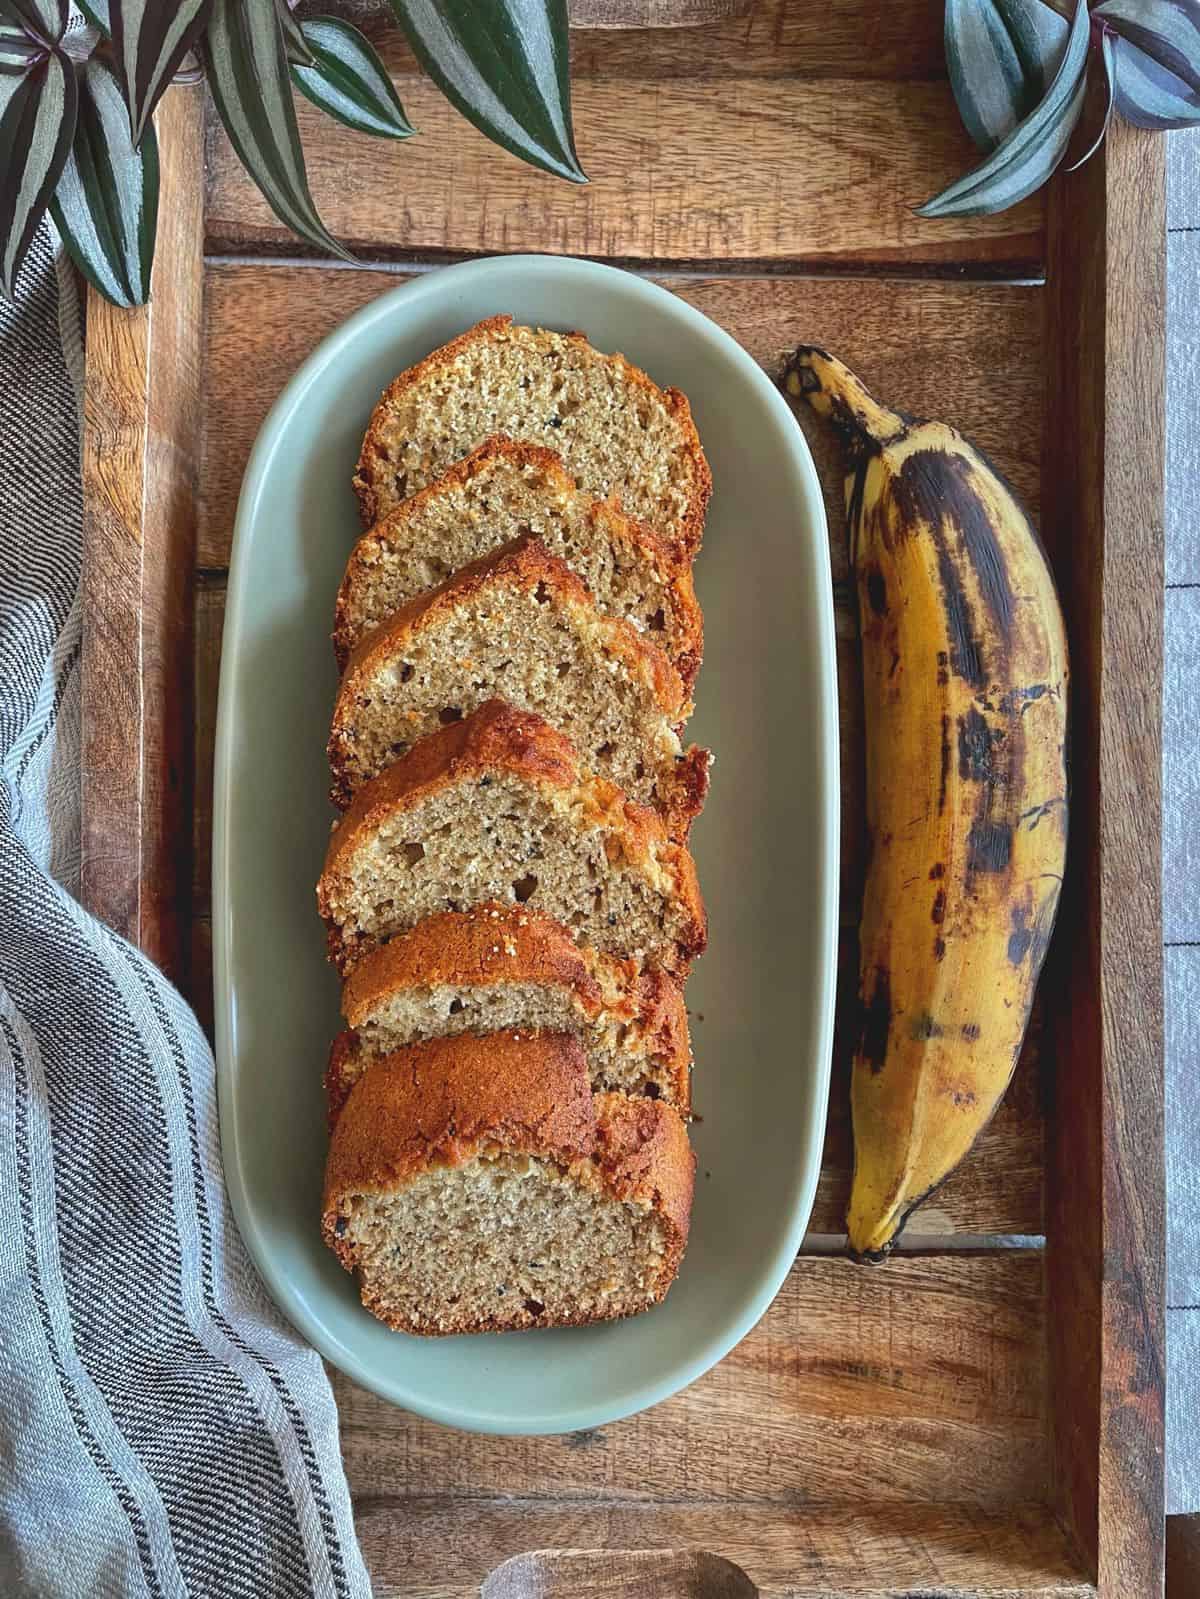 A sliced loaf of plantain bread on an oval plate with a ripe plantain placed beside it.